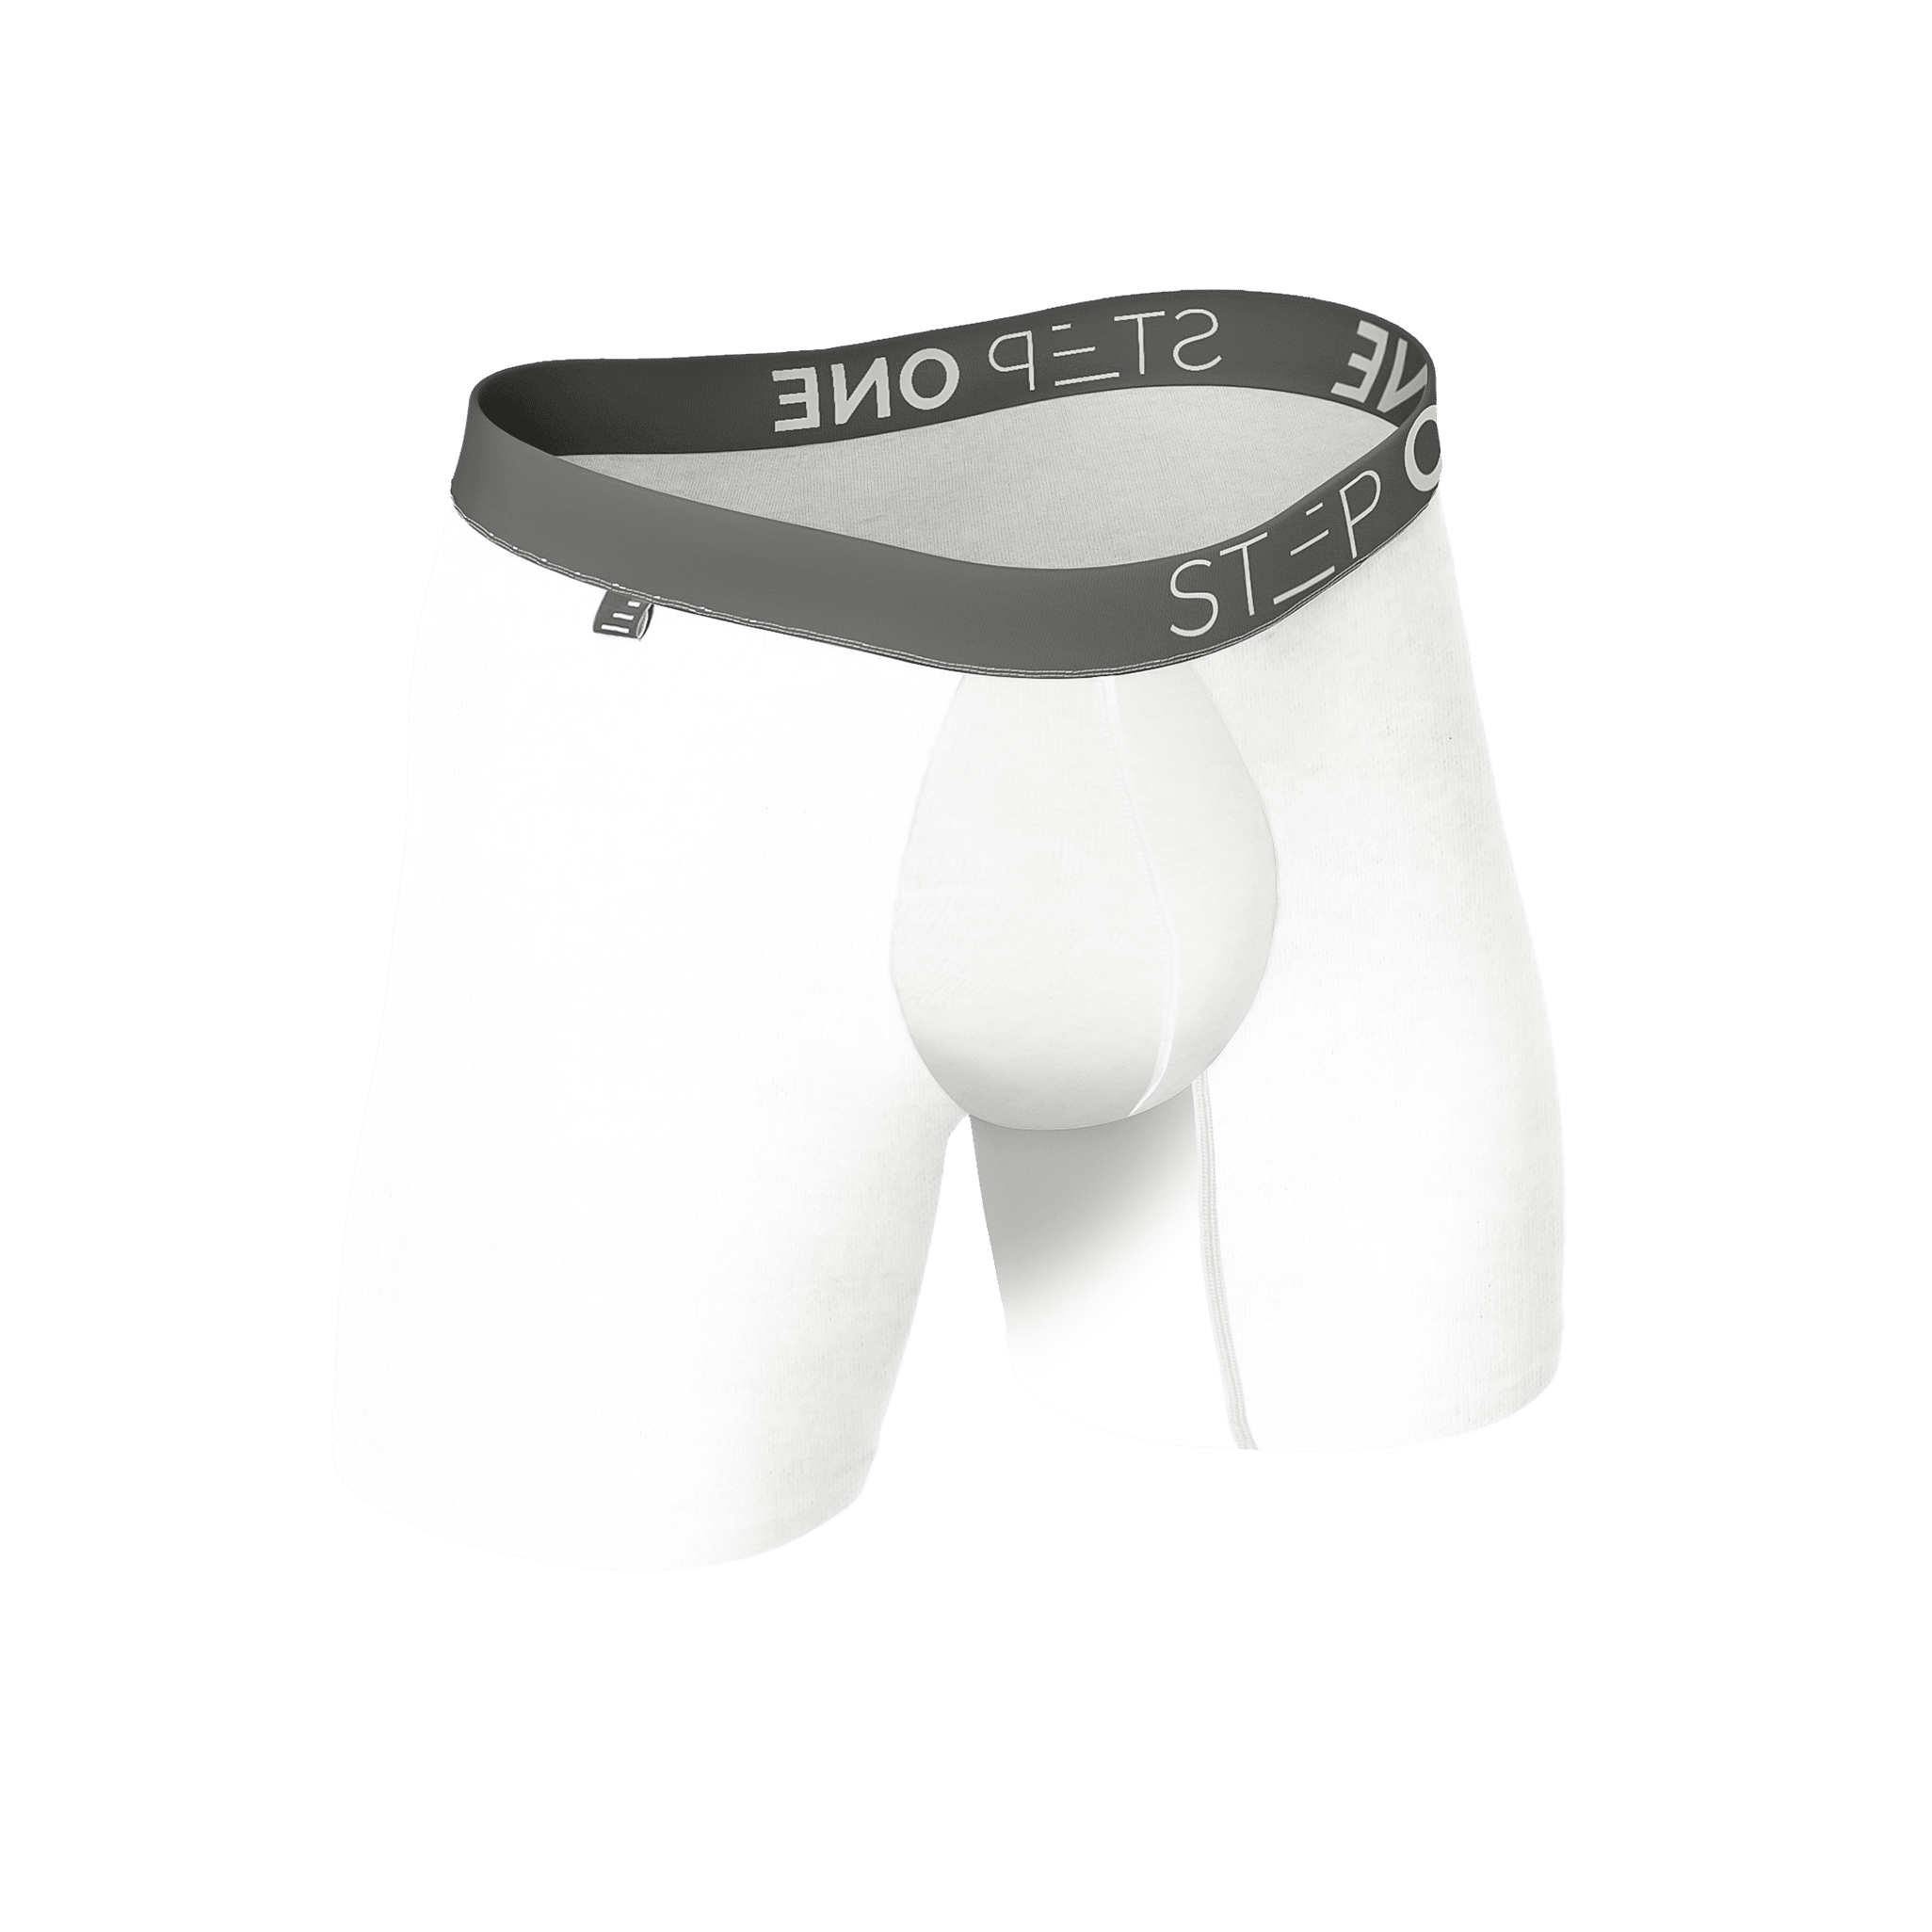 Mens Bamboo Underwear at Step One